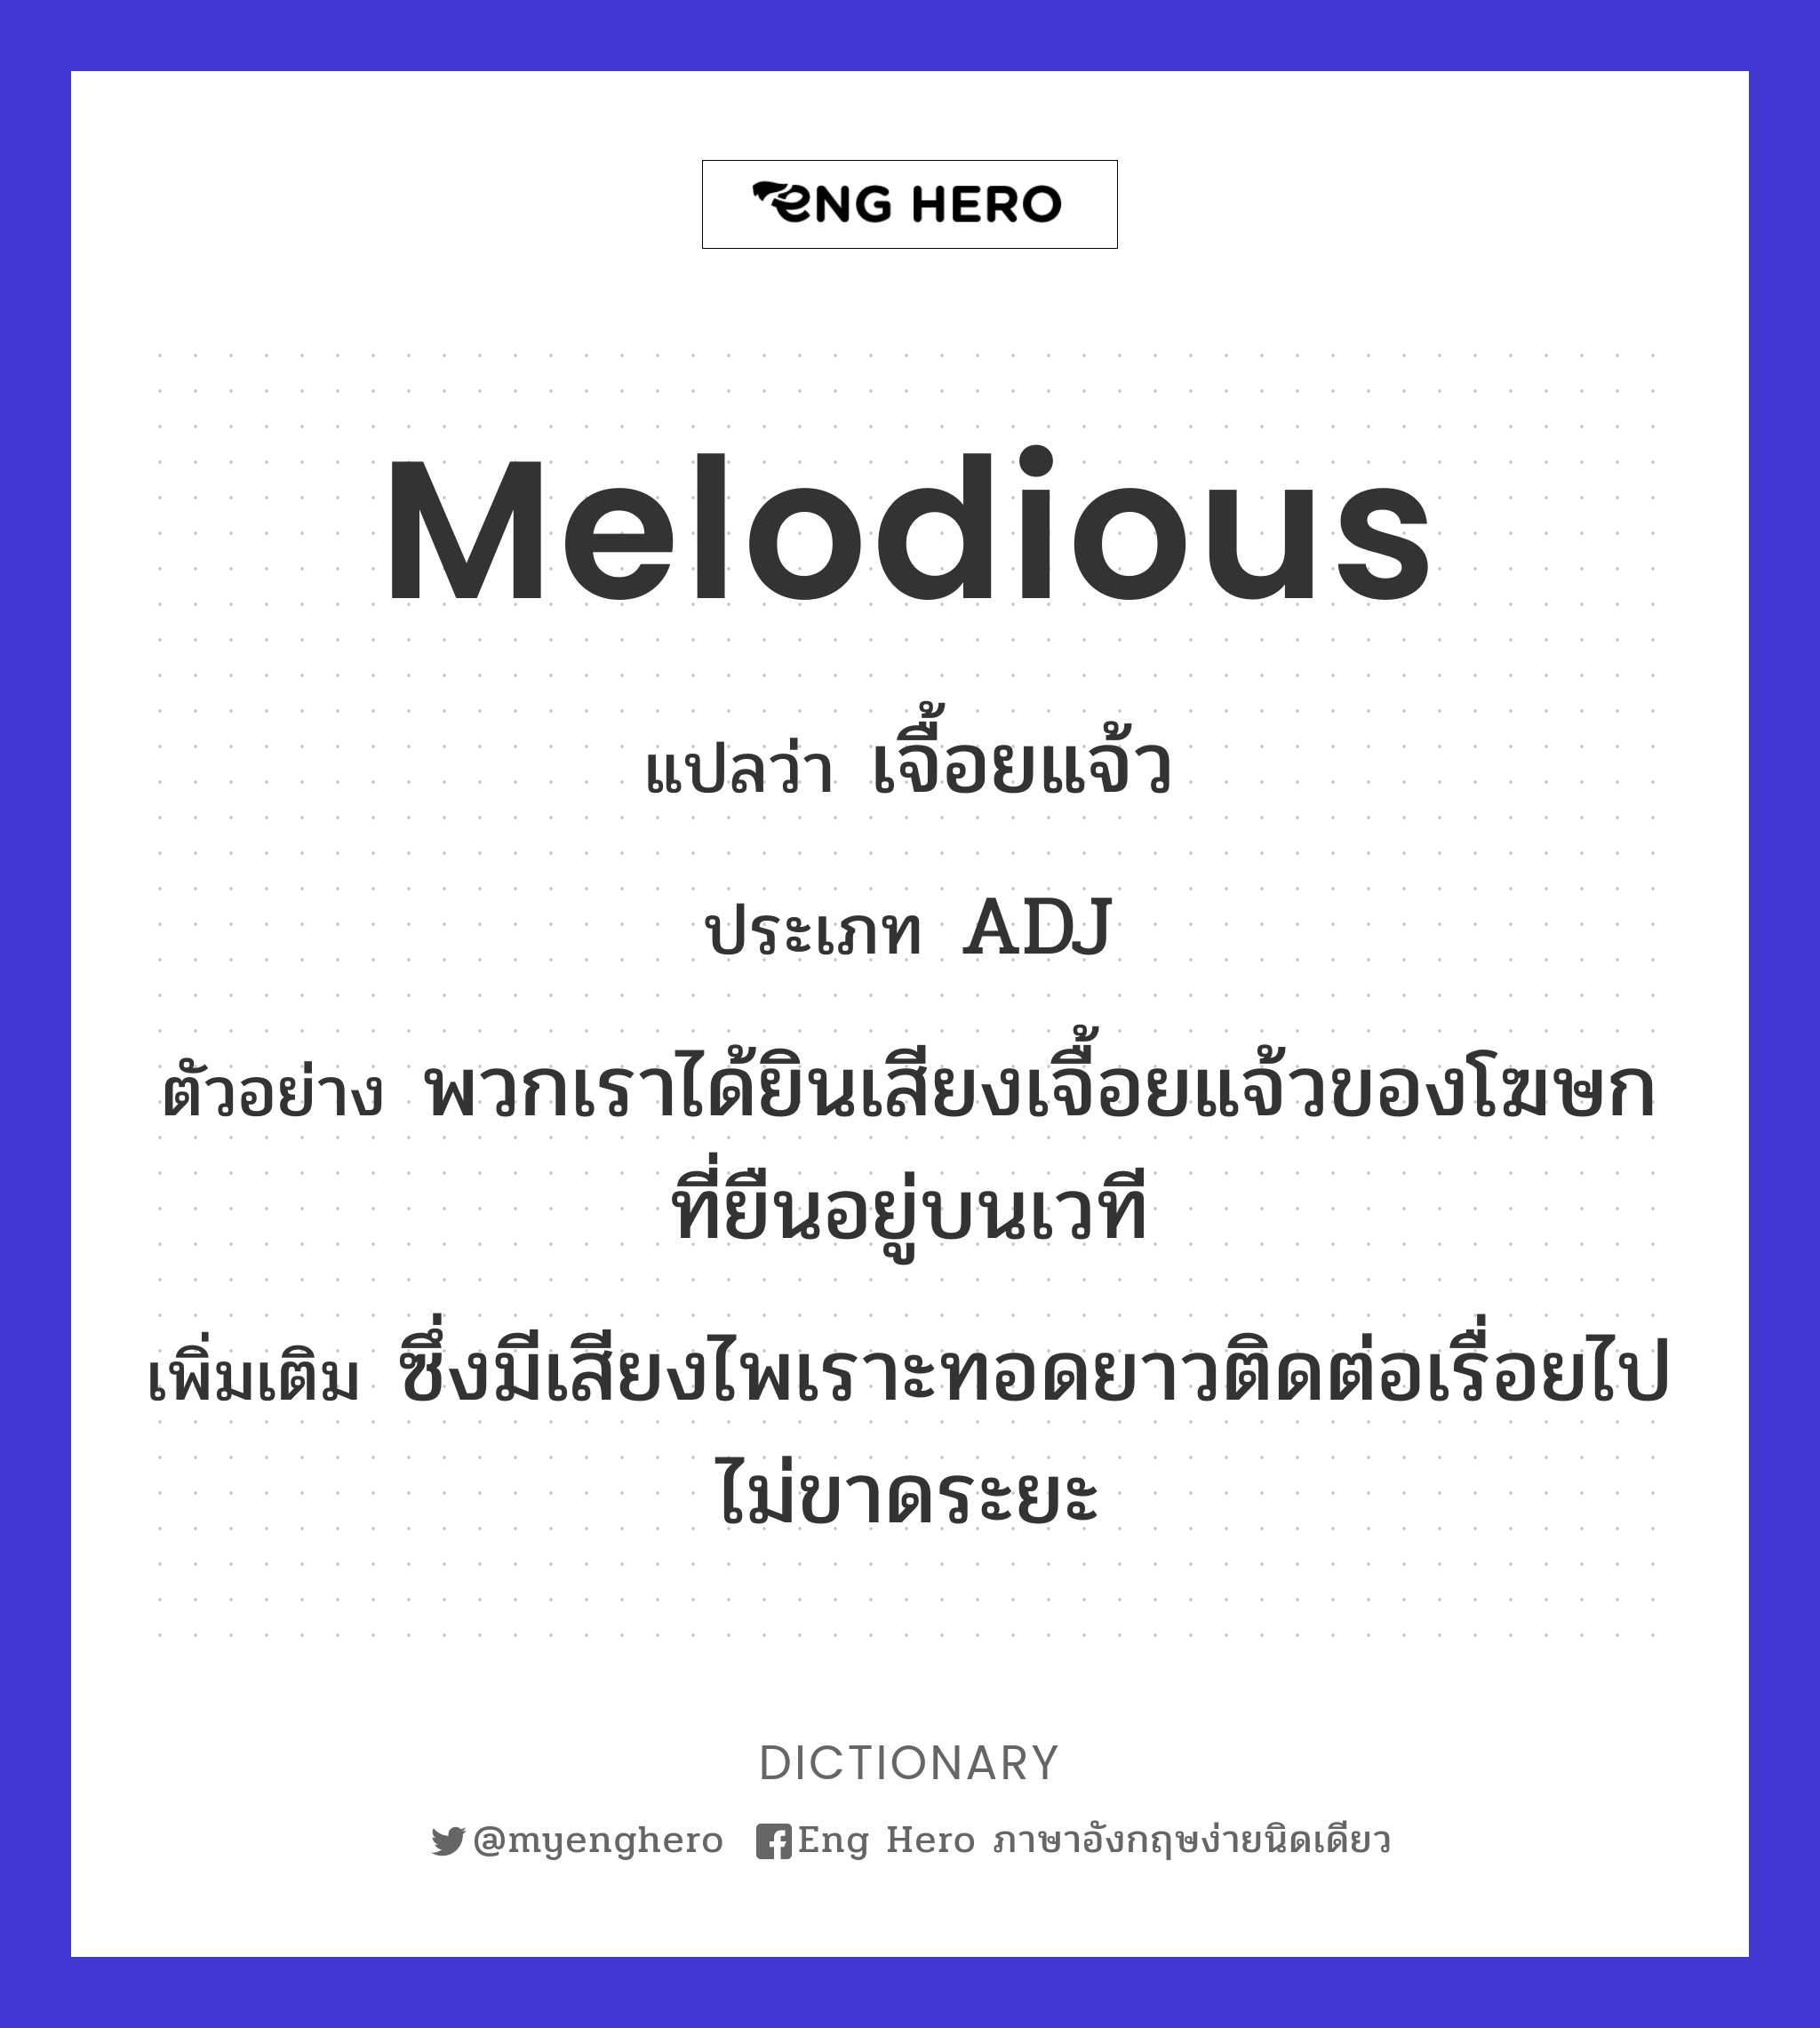 melodious